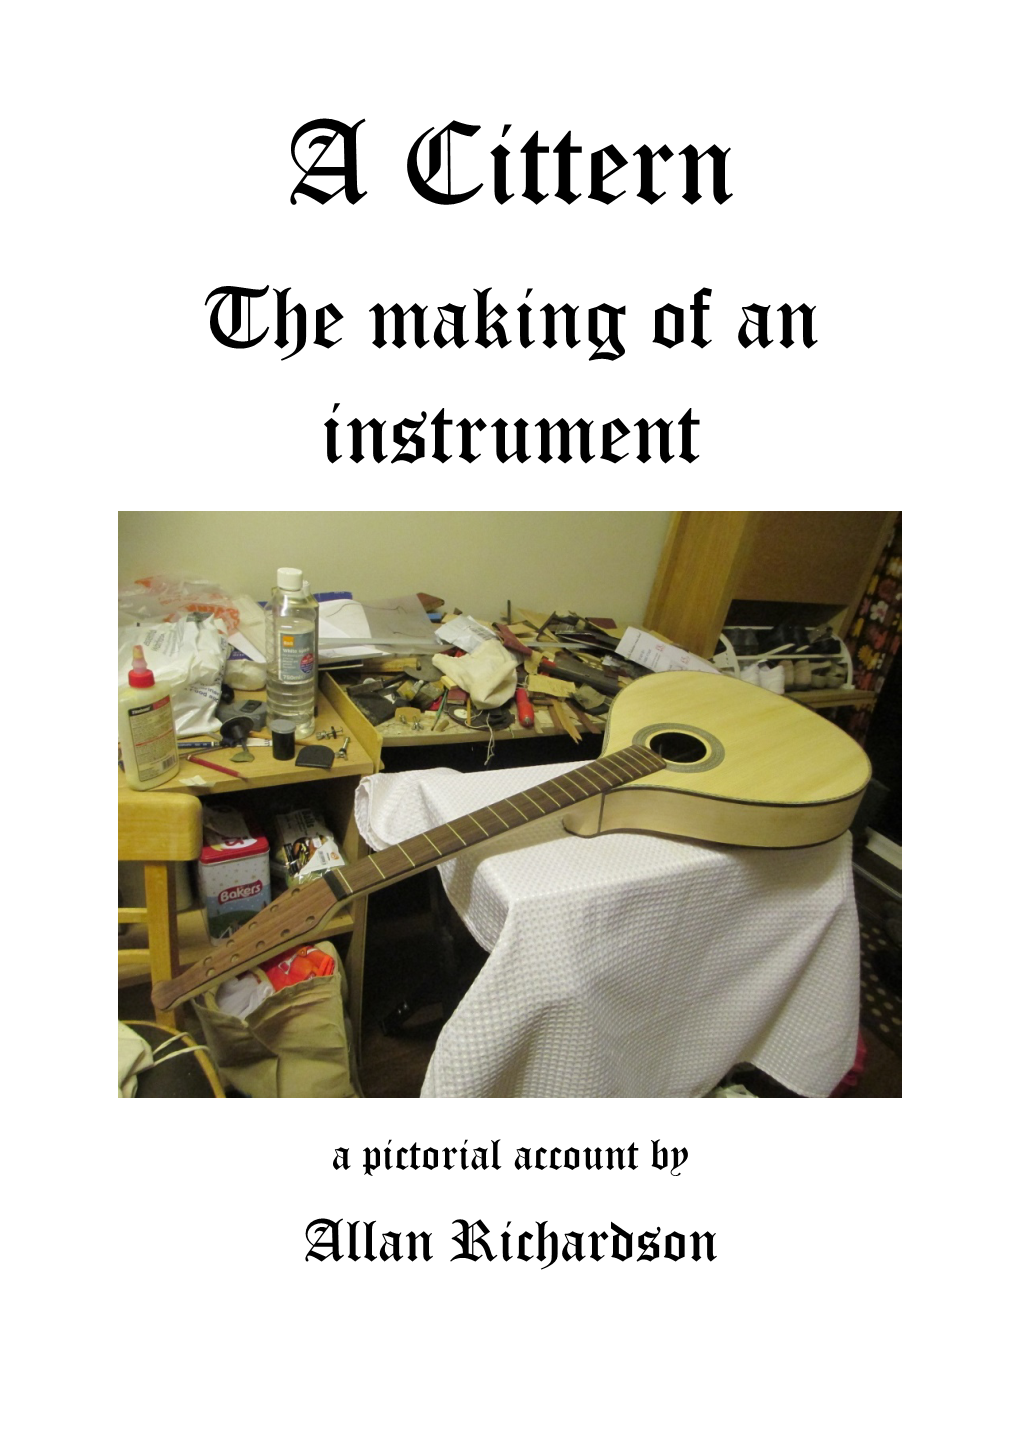 A Cittern the Making of an Instrument